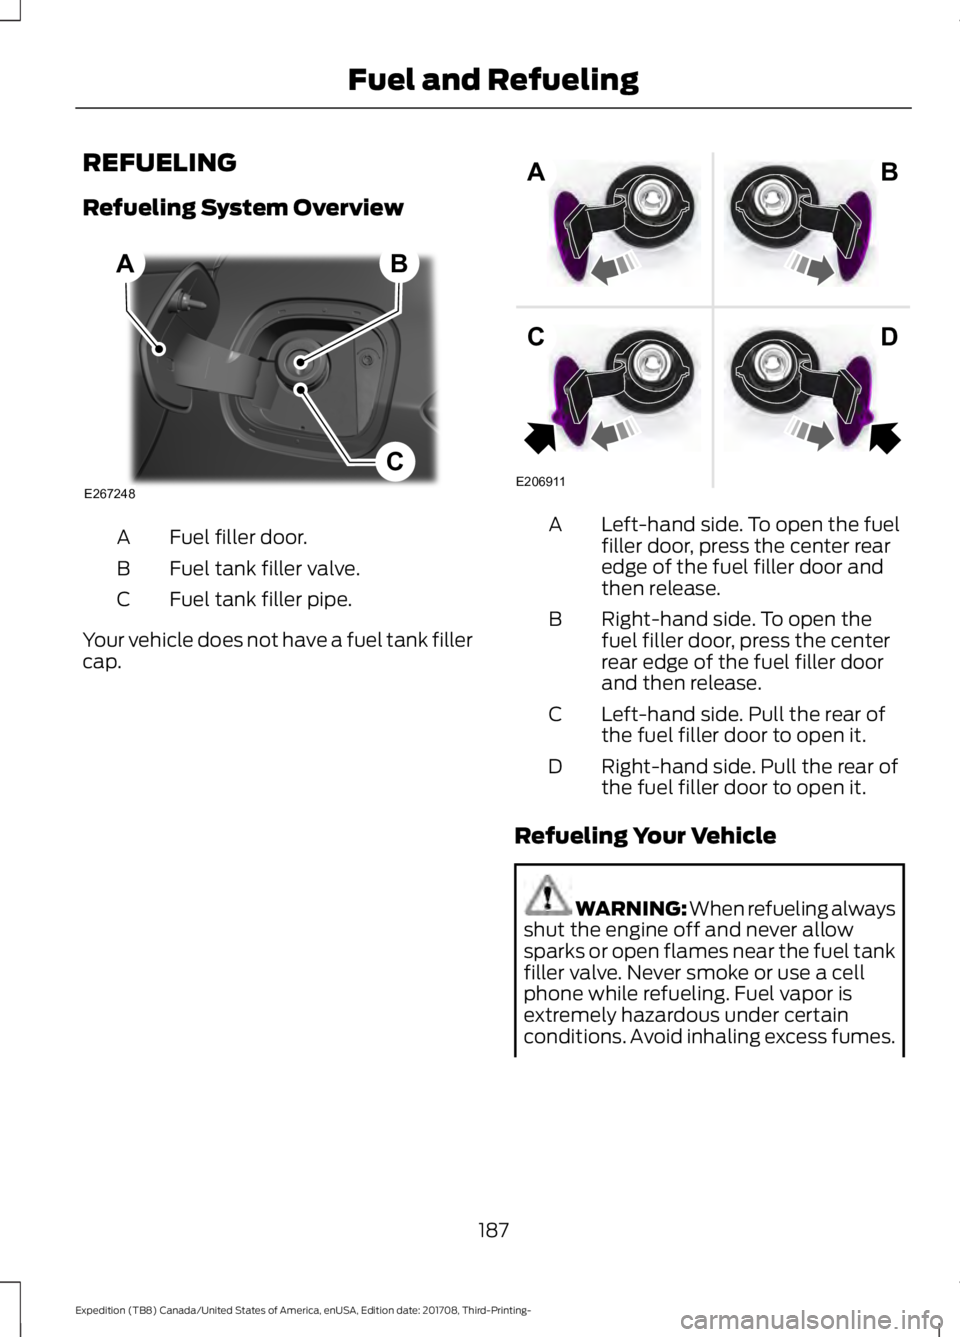 FORD EXPEDITION 2018 Service Manual REFUELING
Refueling System Overview
Fuel filler door.
A
Fuel tank filler valve.
B
Fuel tank filler pipe.
C
Your vehicle does not have a fuel tank filler
cap. Left-hand side. To open the fuel
filler do